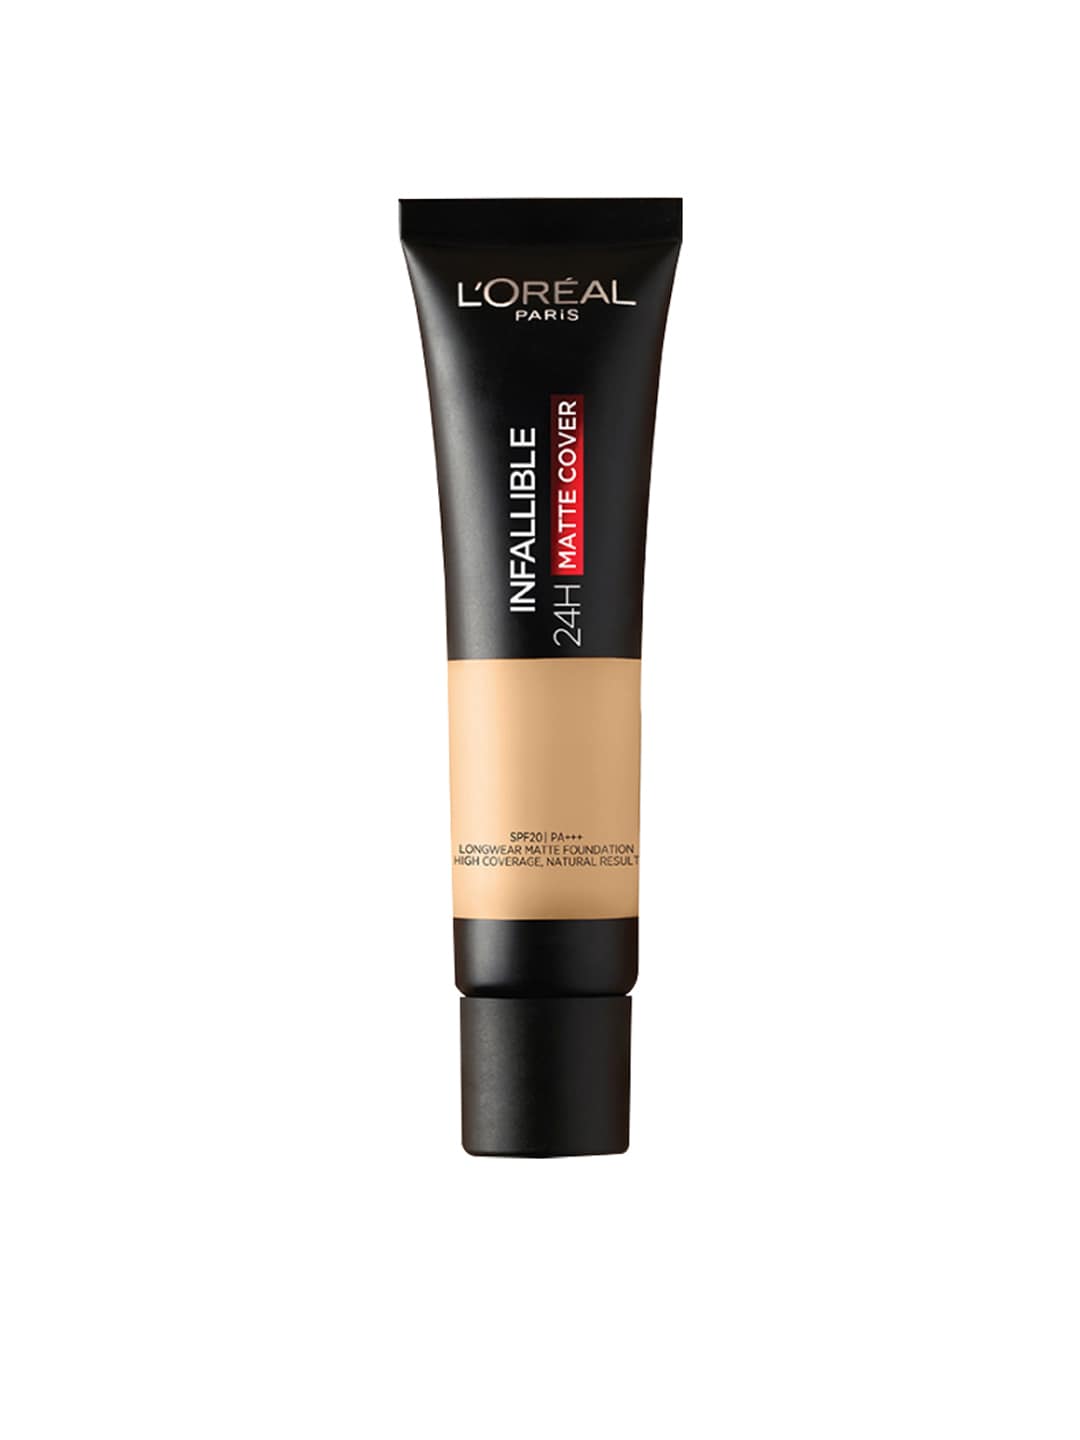 LOreal Paris Infallible 24h Matte Cover SPF20 PA++ Liquid Foundation- 140 Golden Beige Price in India